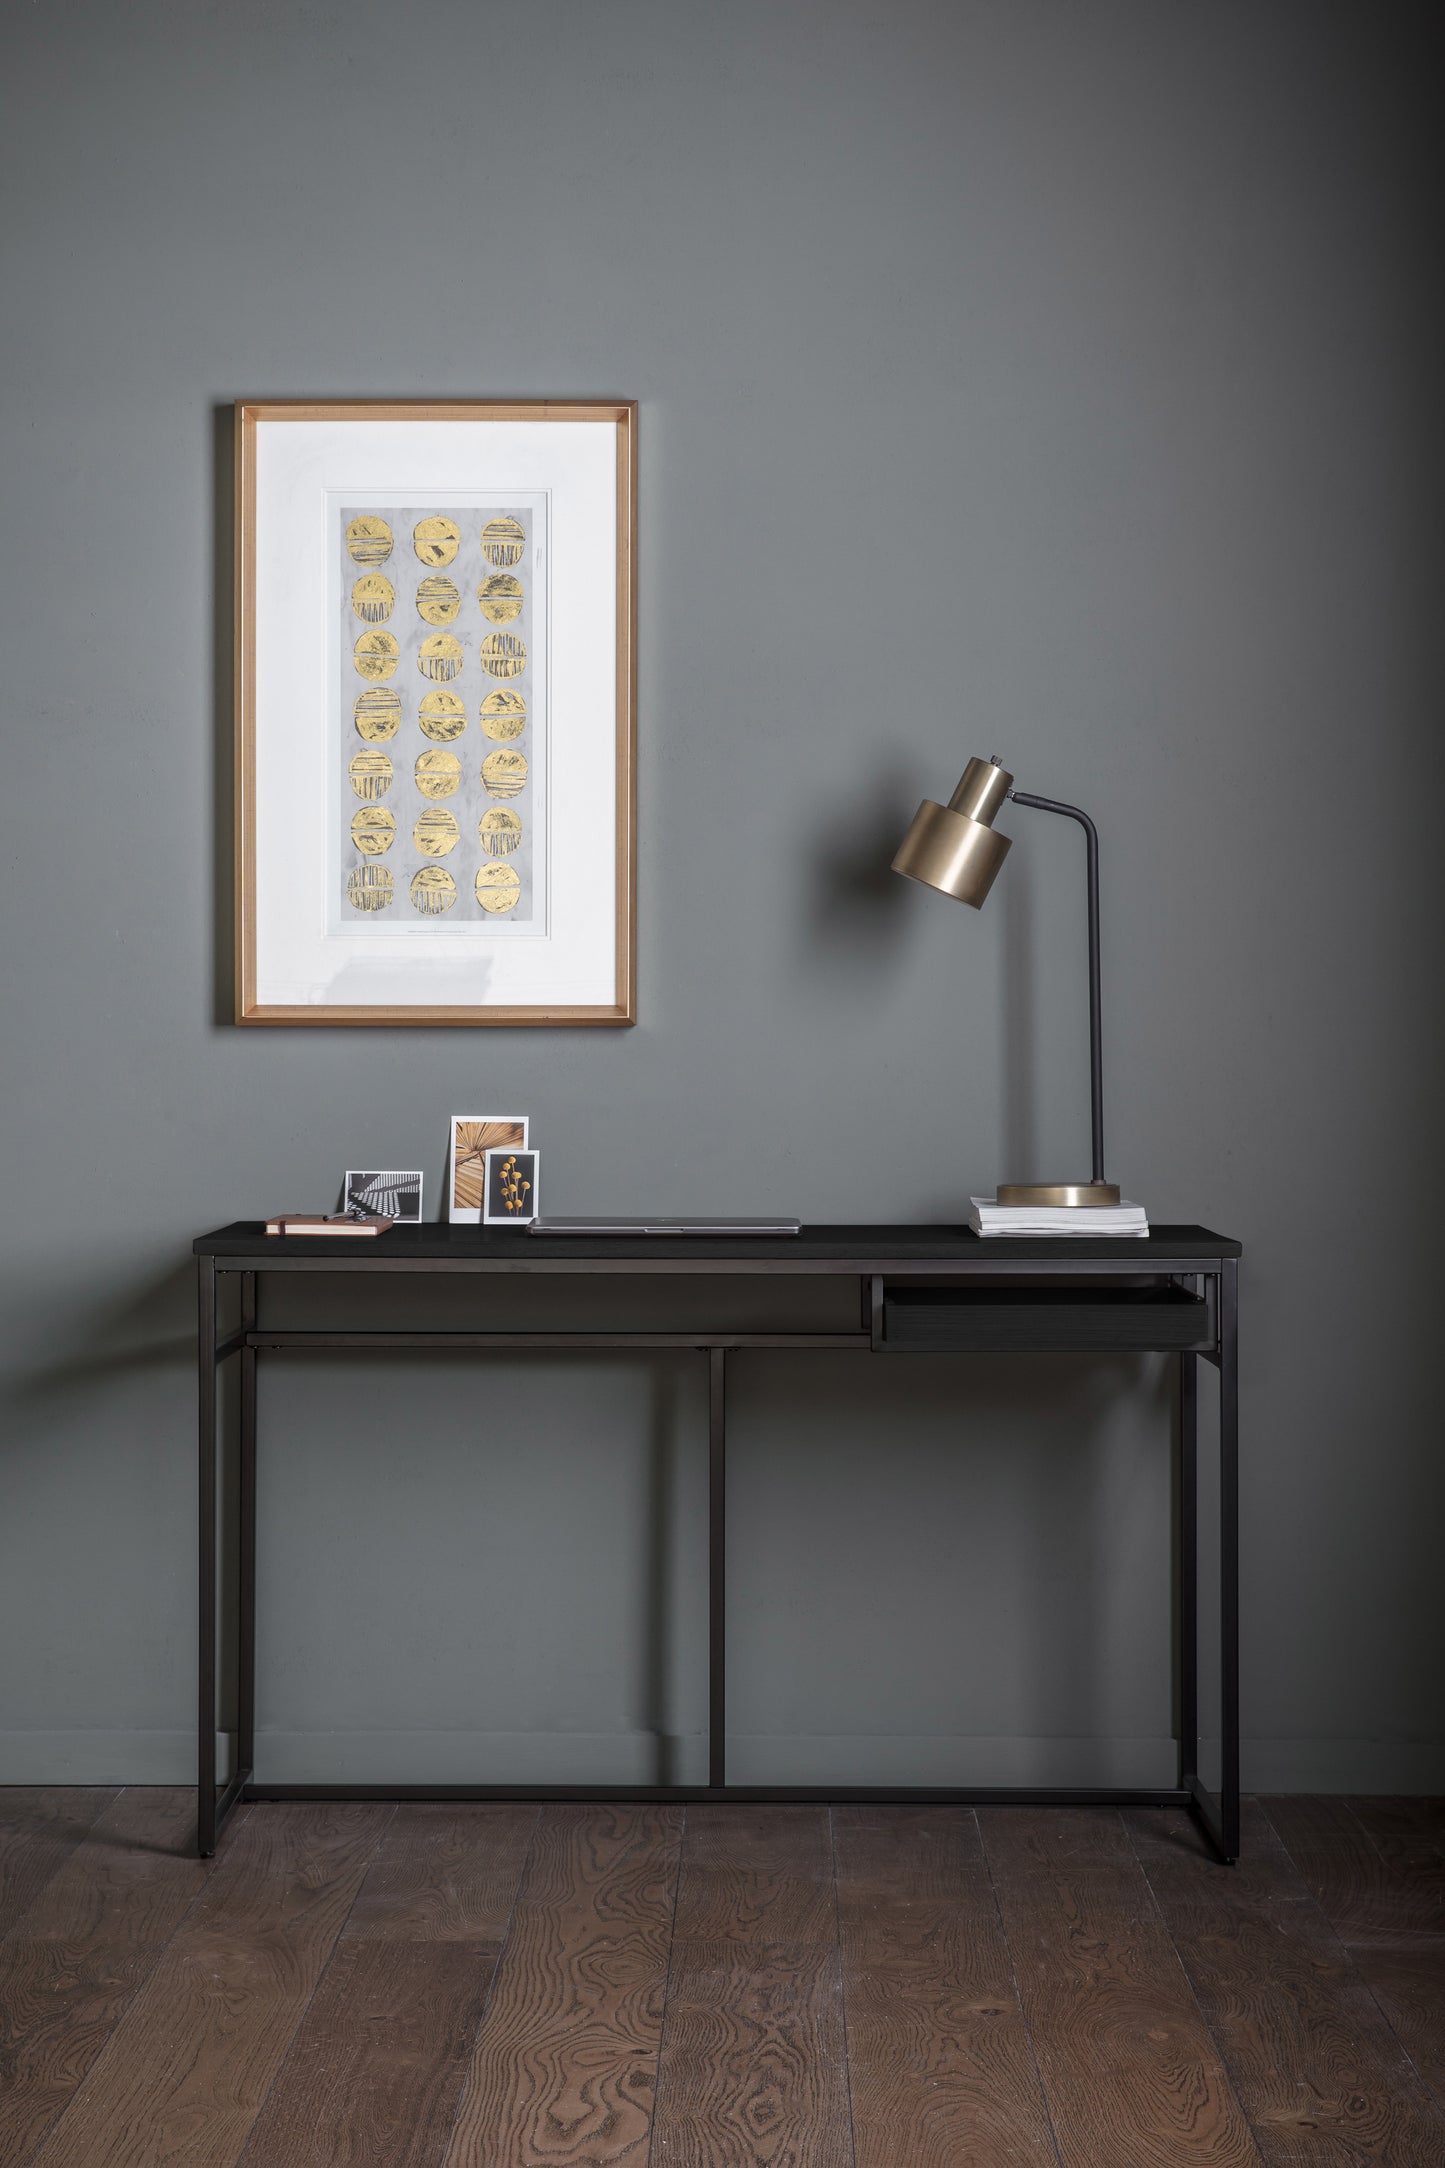 A Ringmore Desk Black 1300x500x760mm by Kikiathome.co.uk in a room with a painting on the wall, perfect for home furniture and interior decor.